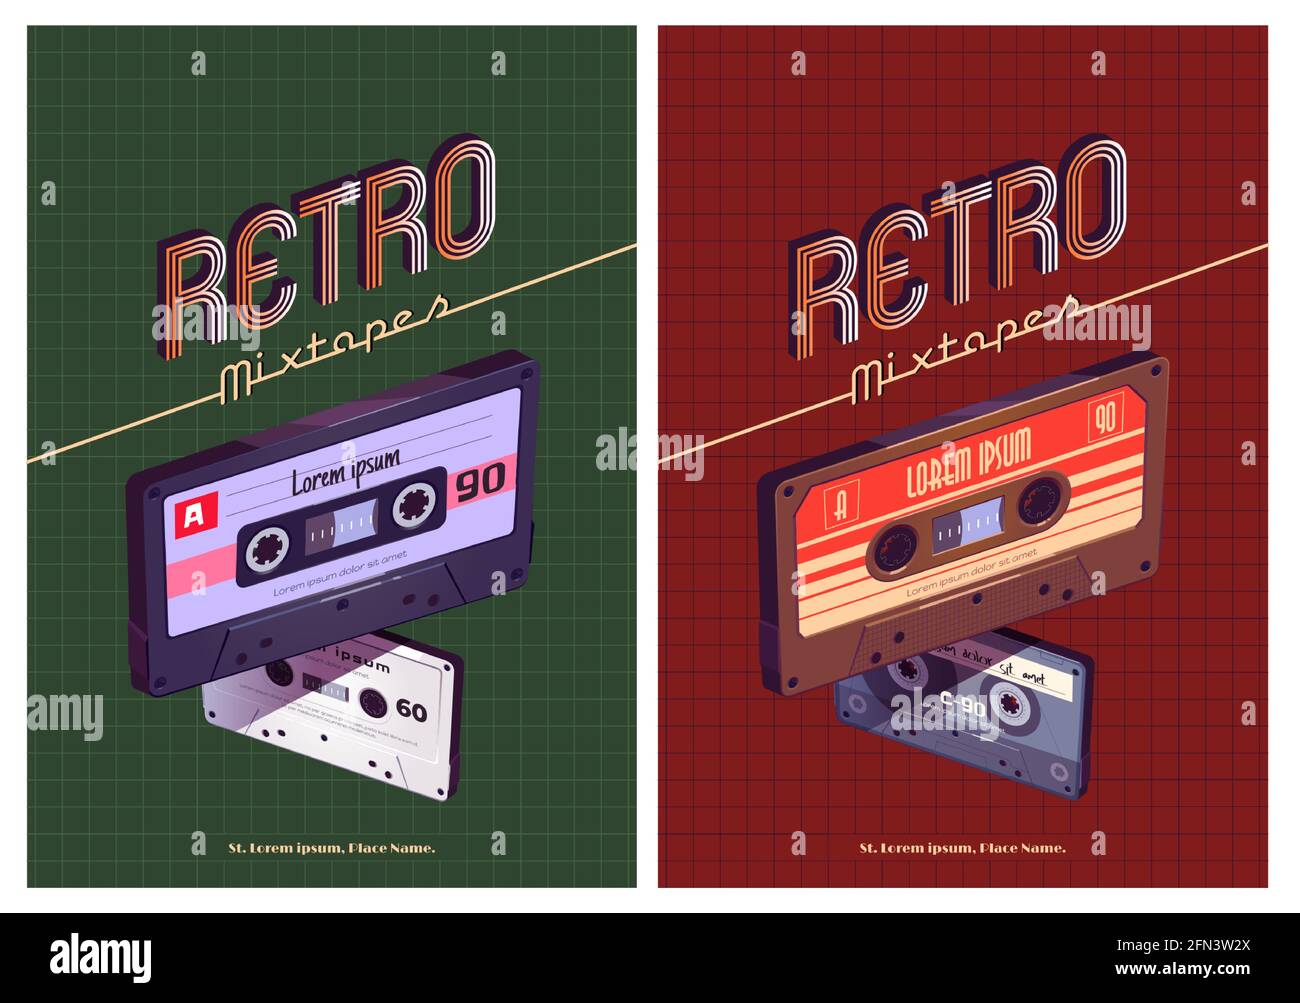 Retro mixtapes cartoon poster with audio mix tapes. Cassettes, media or music store ad in vintage style, analog multimedia devices, Vector illustration Stock Vector